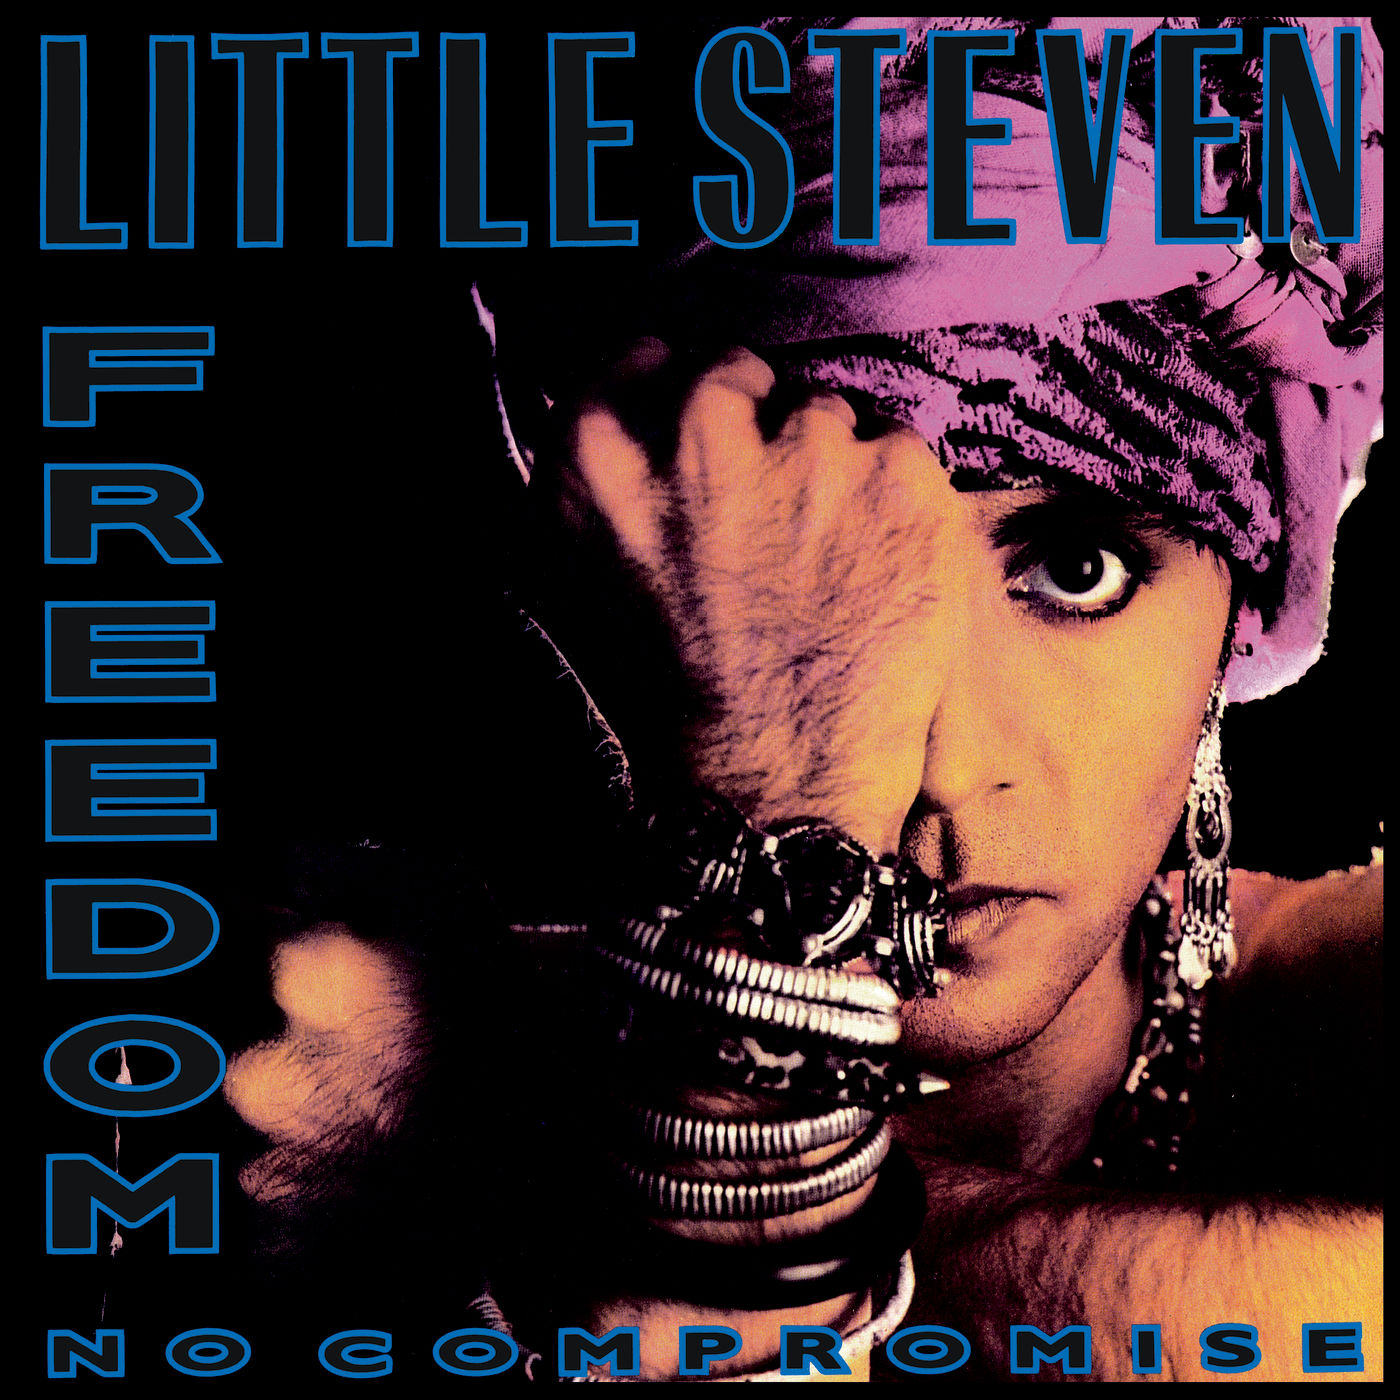 Little Steven – Freedom – No Compromise (Deluxe Edition) (1987/2019) [FLAC 24bit/96kHz]